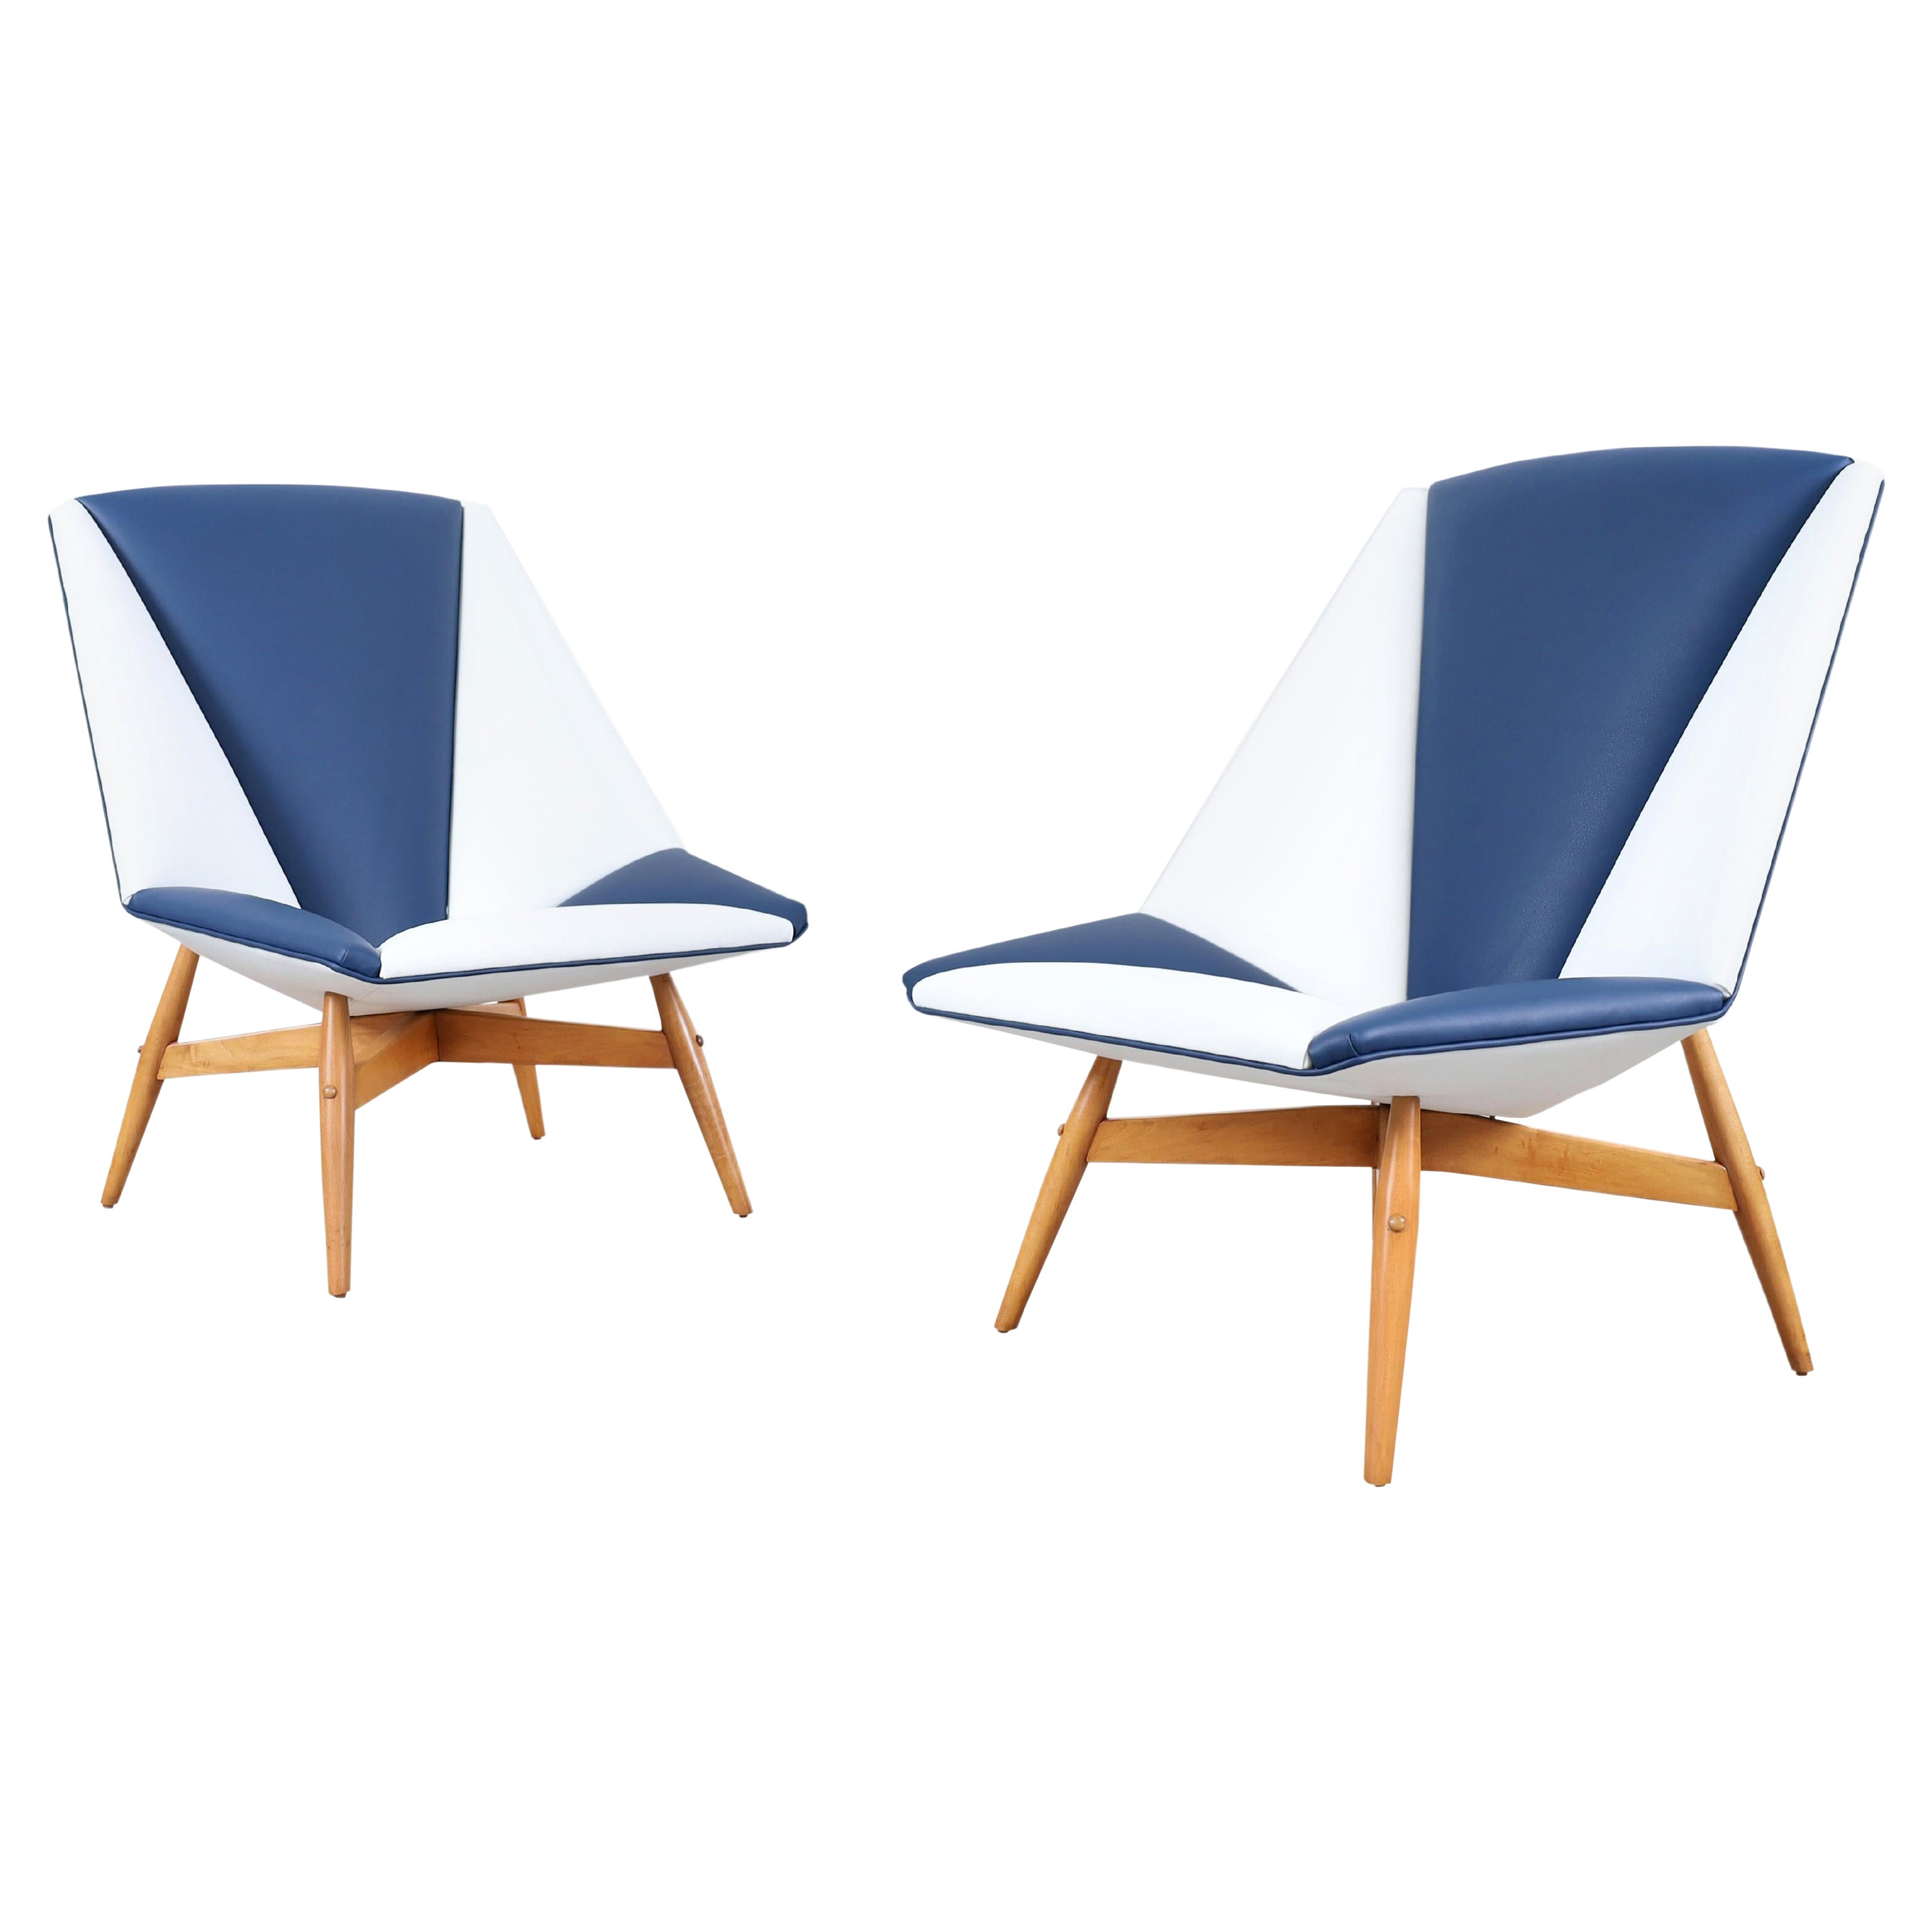 Italian Modernist Leather Lounge Chairs